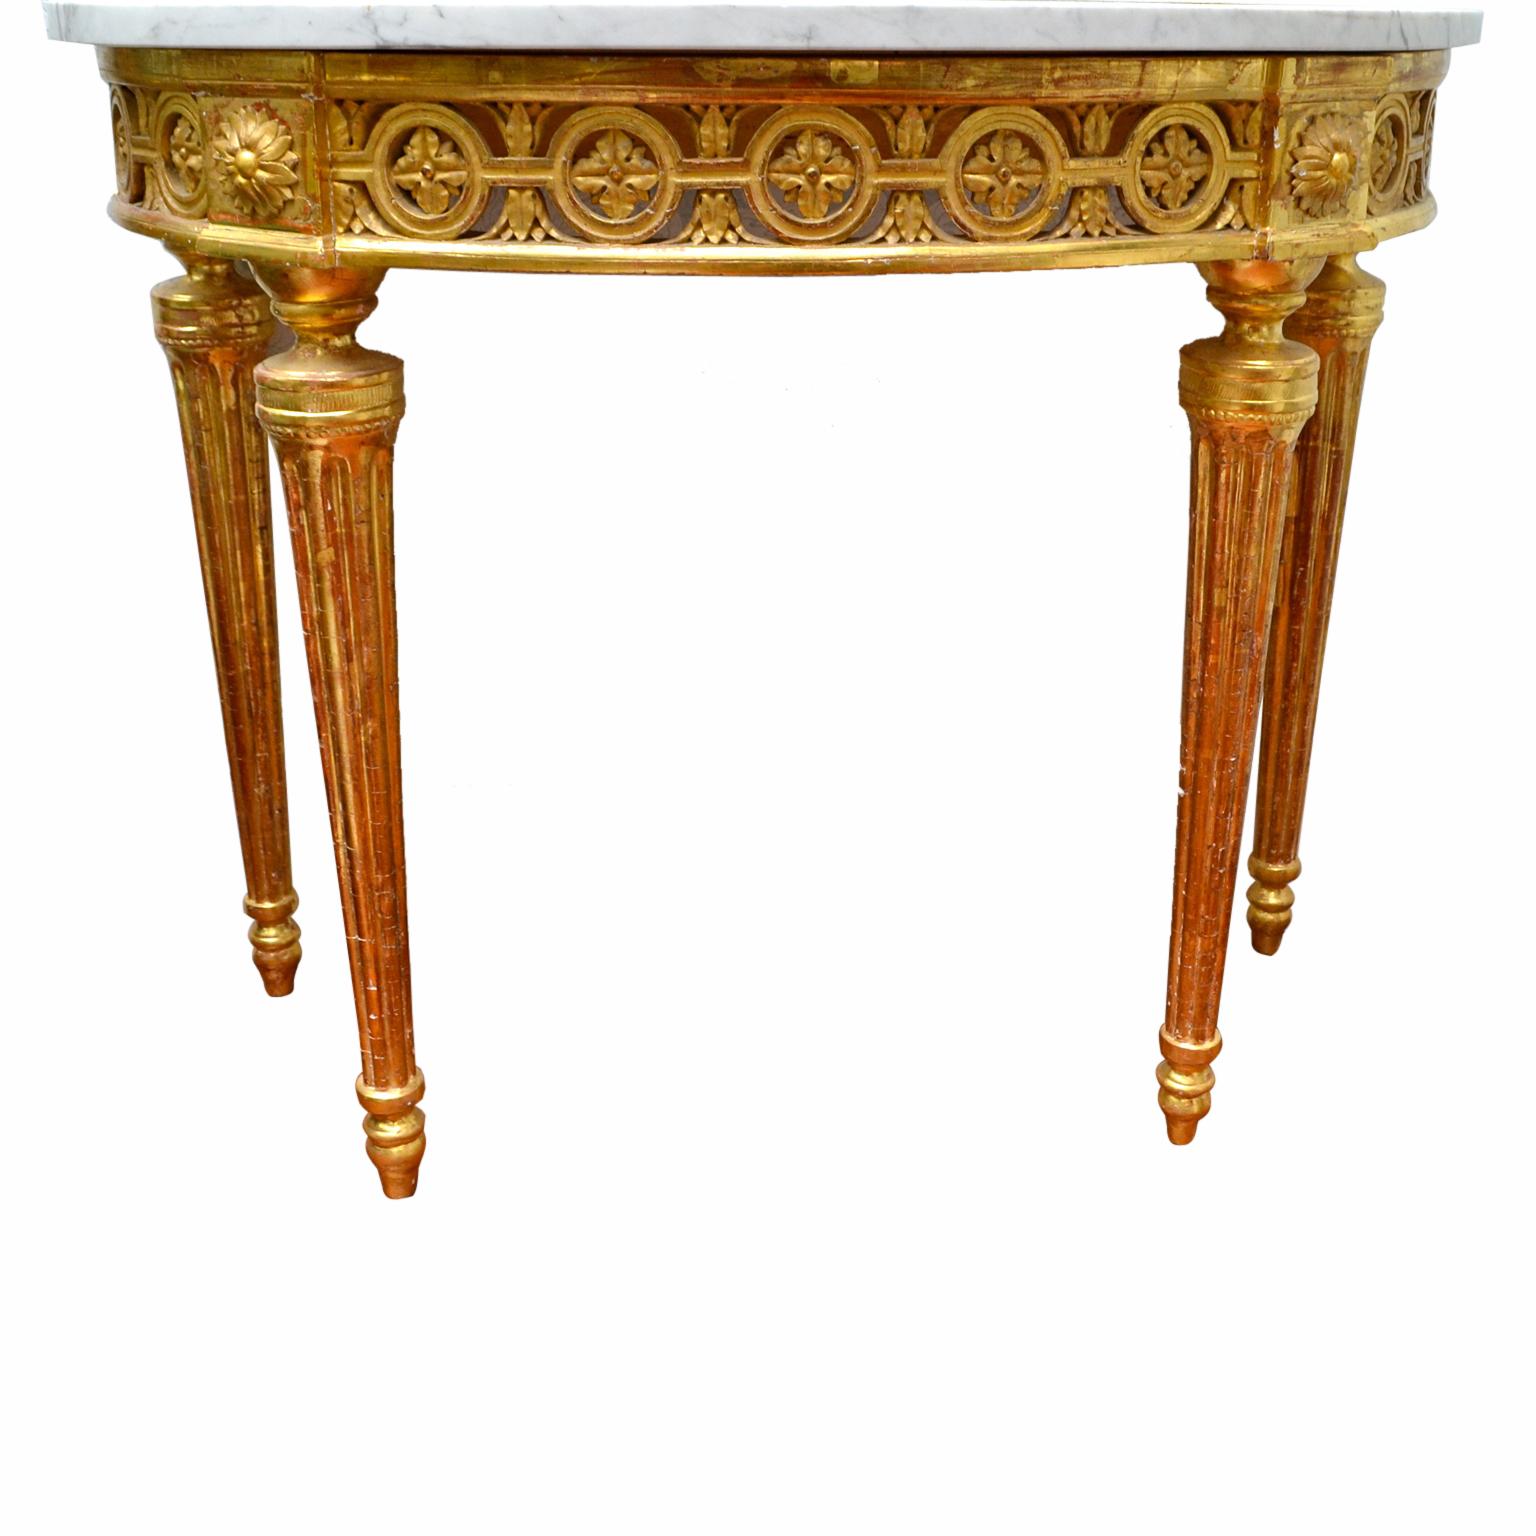 Late 18th Century Italian Giltwood Mirror and Demilune Console For Sale 8